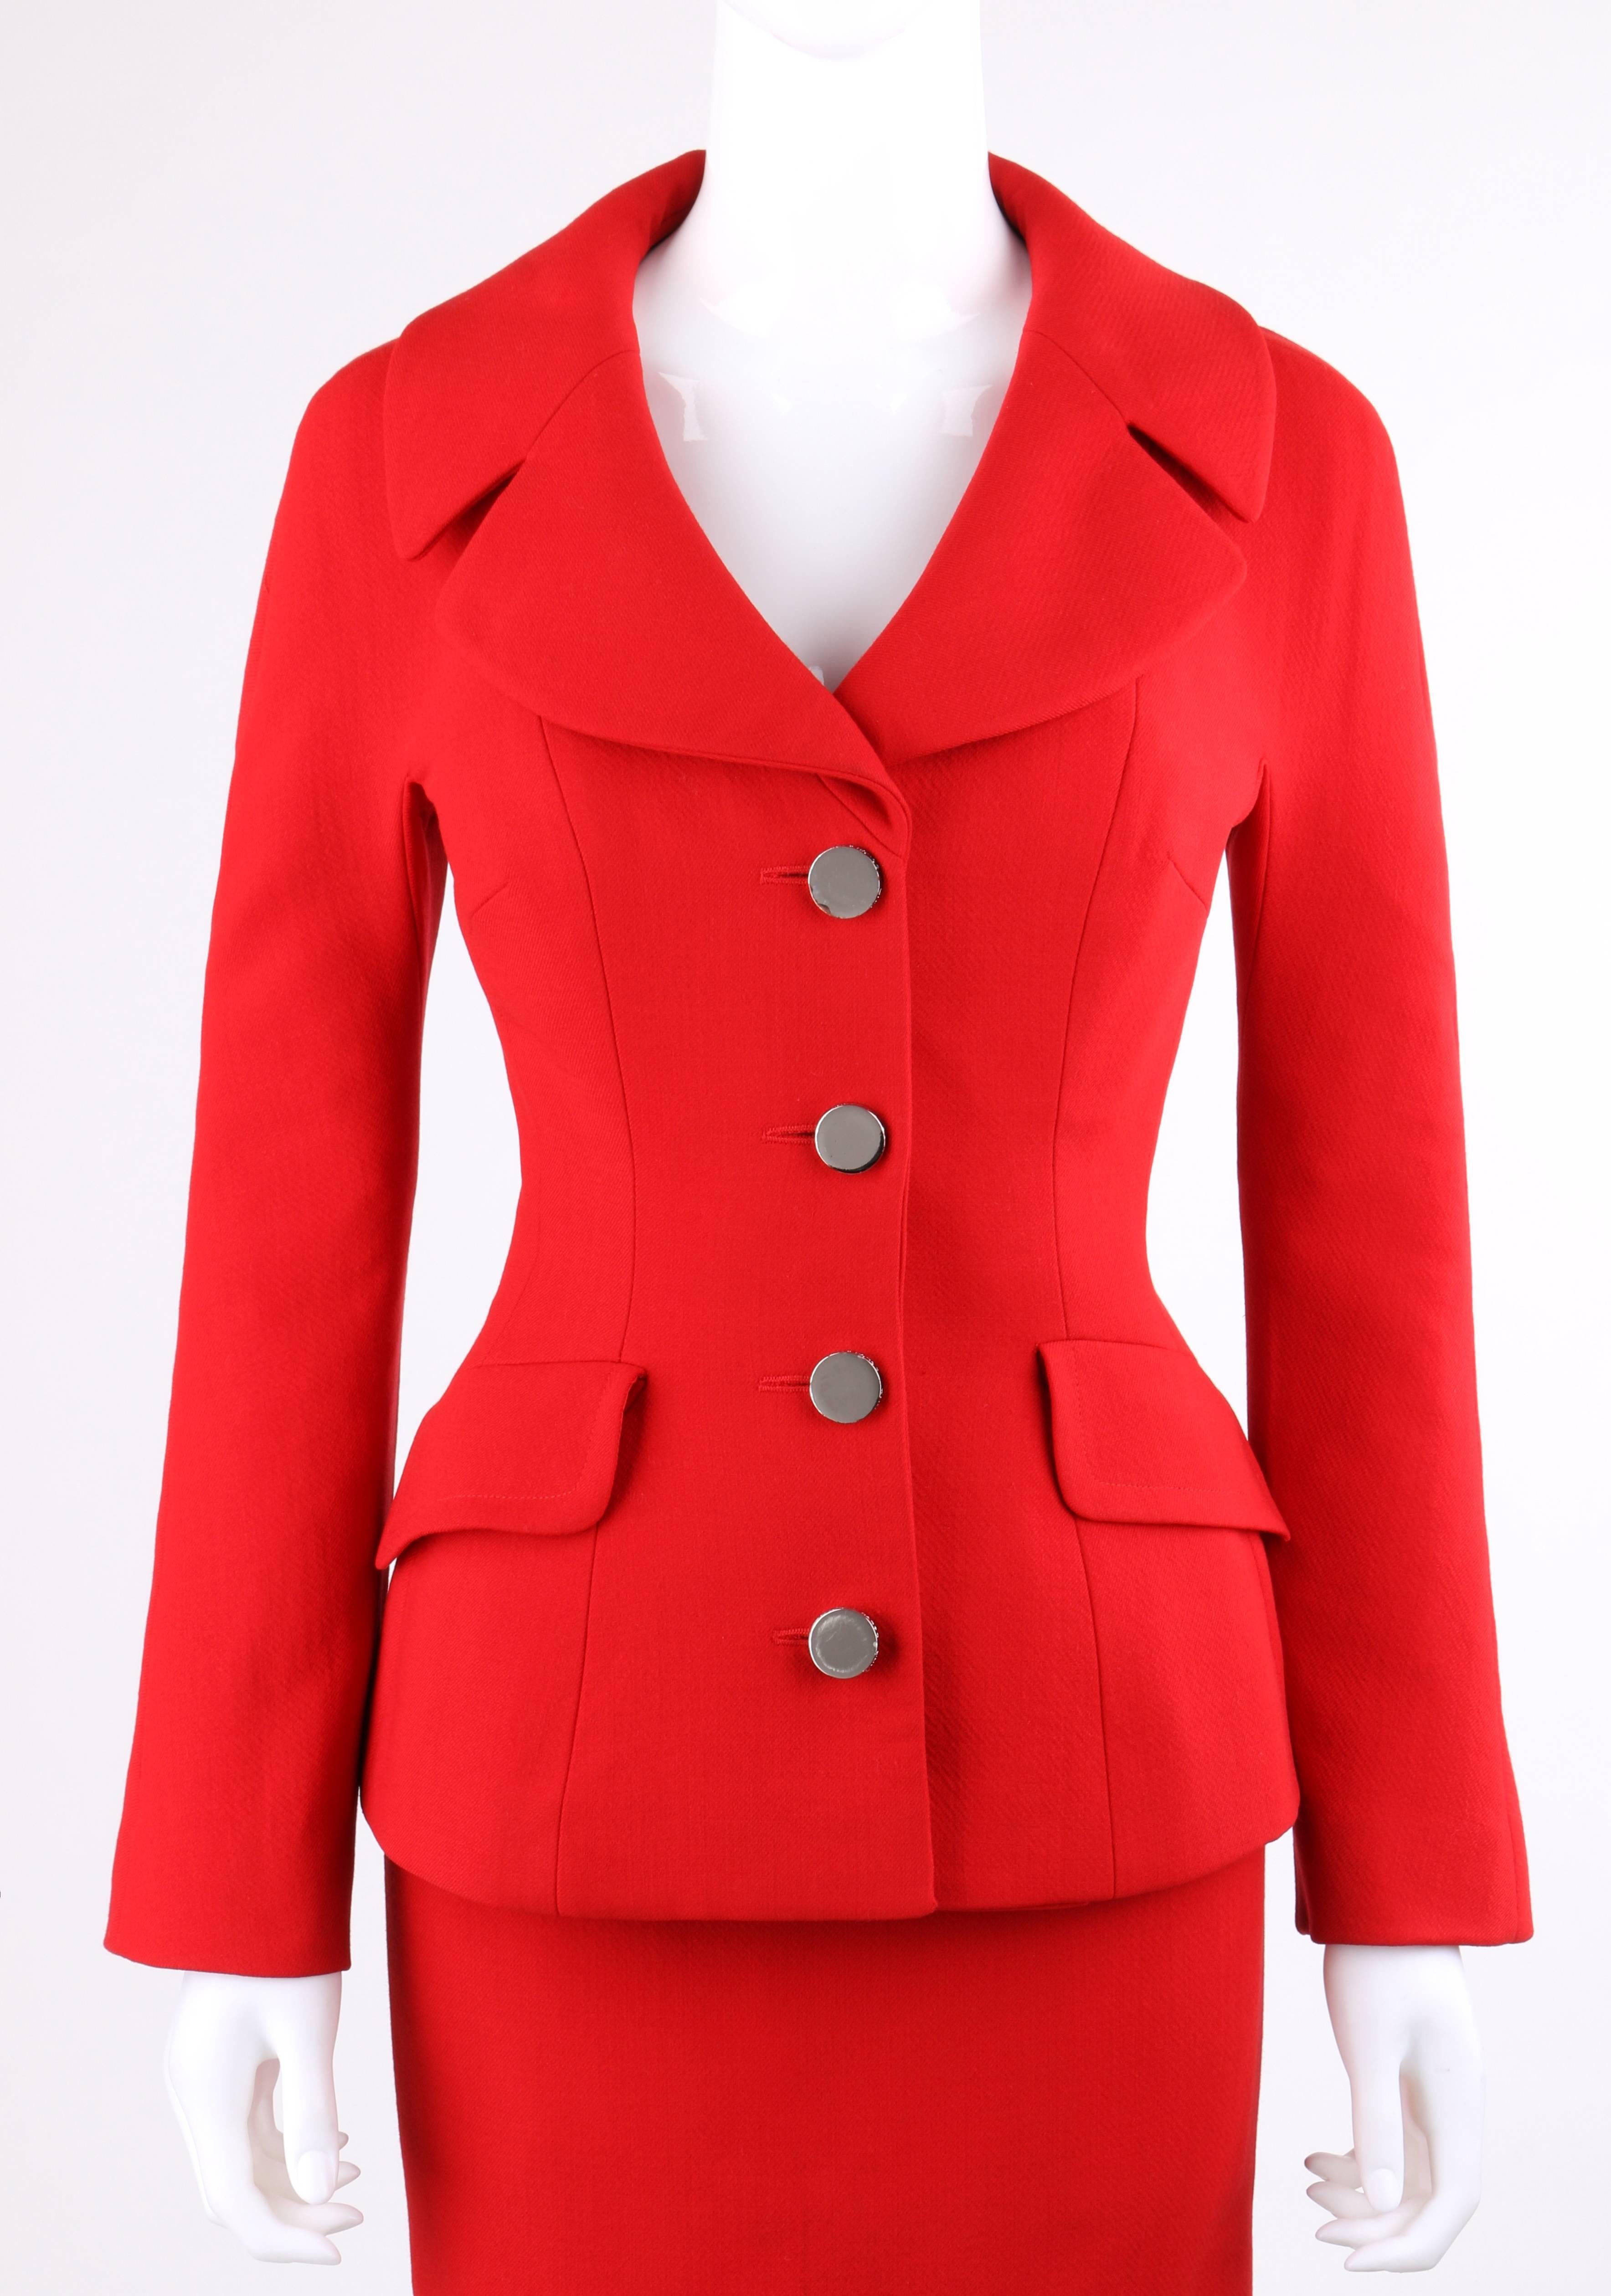 Dolce & Gabbana Autumn/Winter 1995 two piece red 100% wool skirt suit from the controversial 